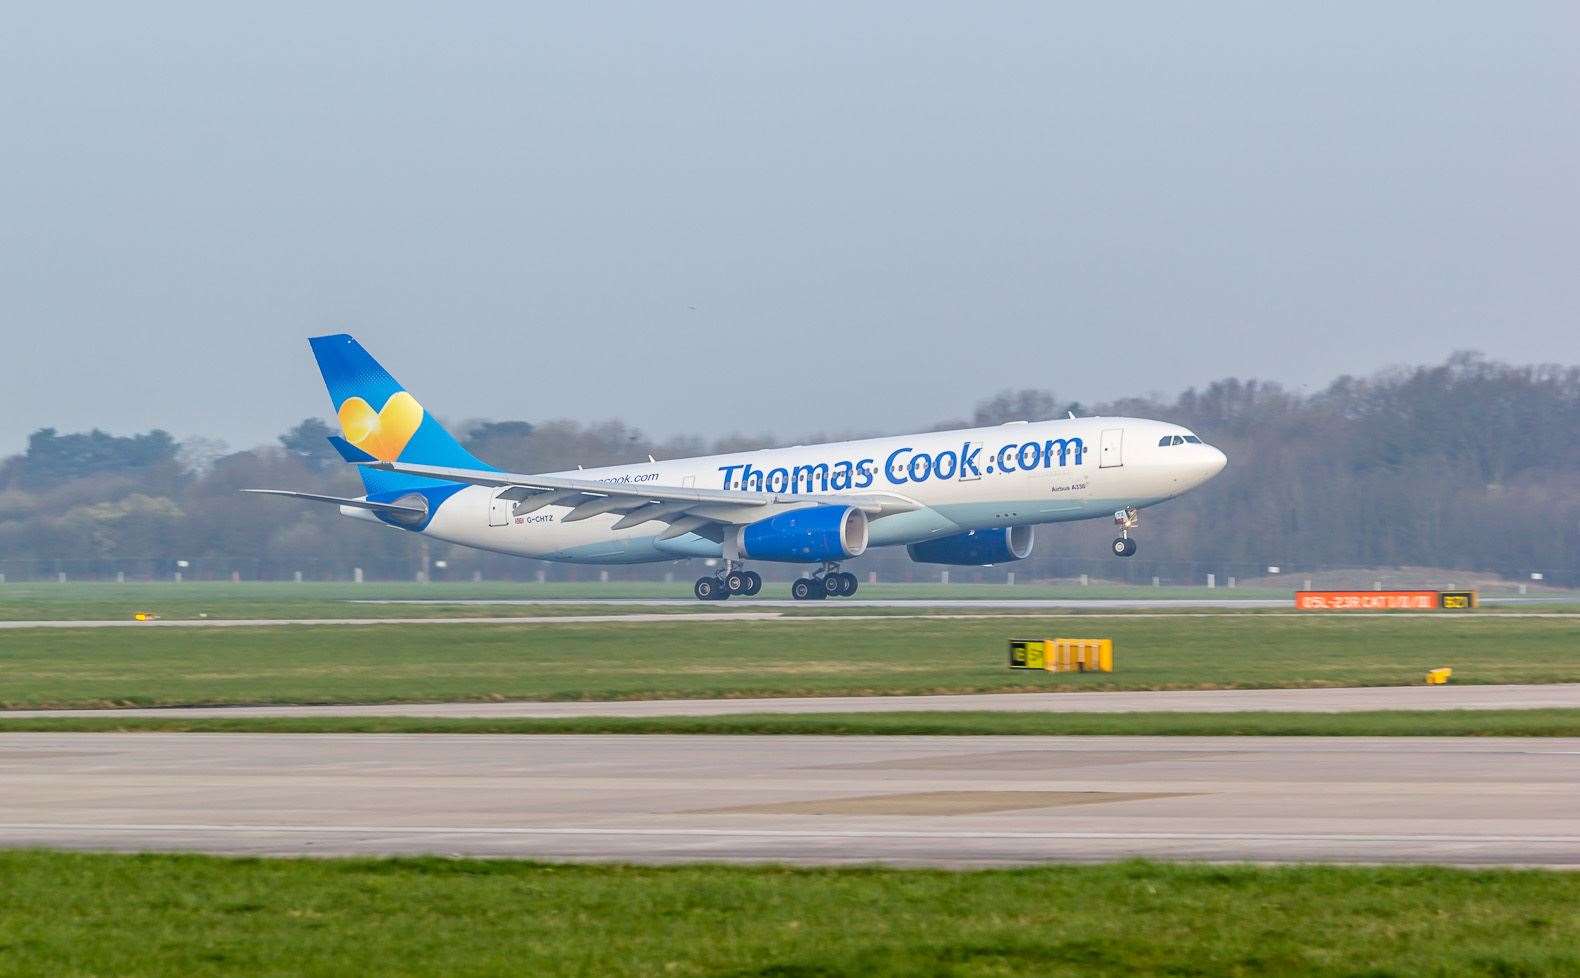 Thomas Cook has gone bust